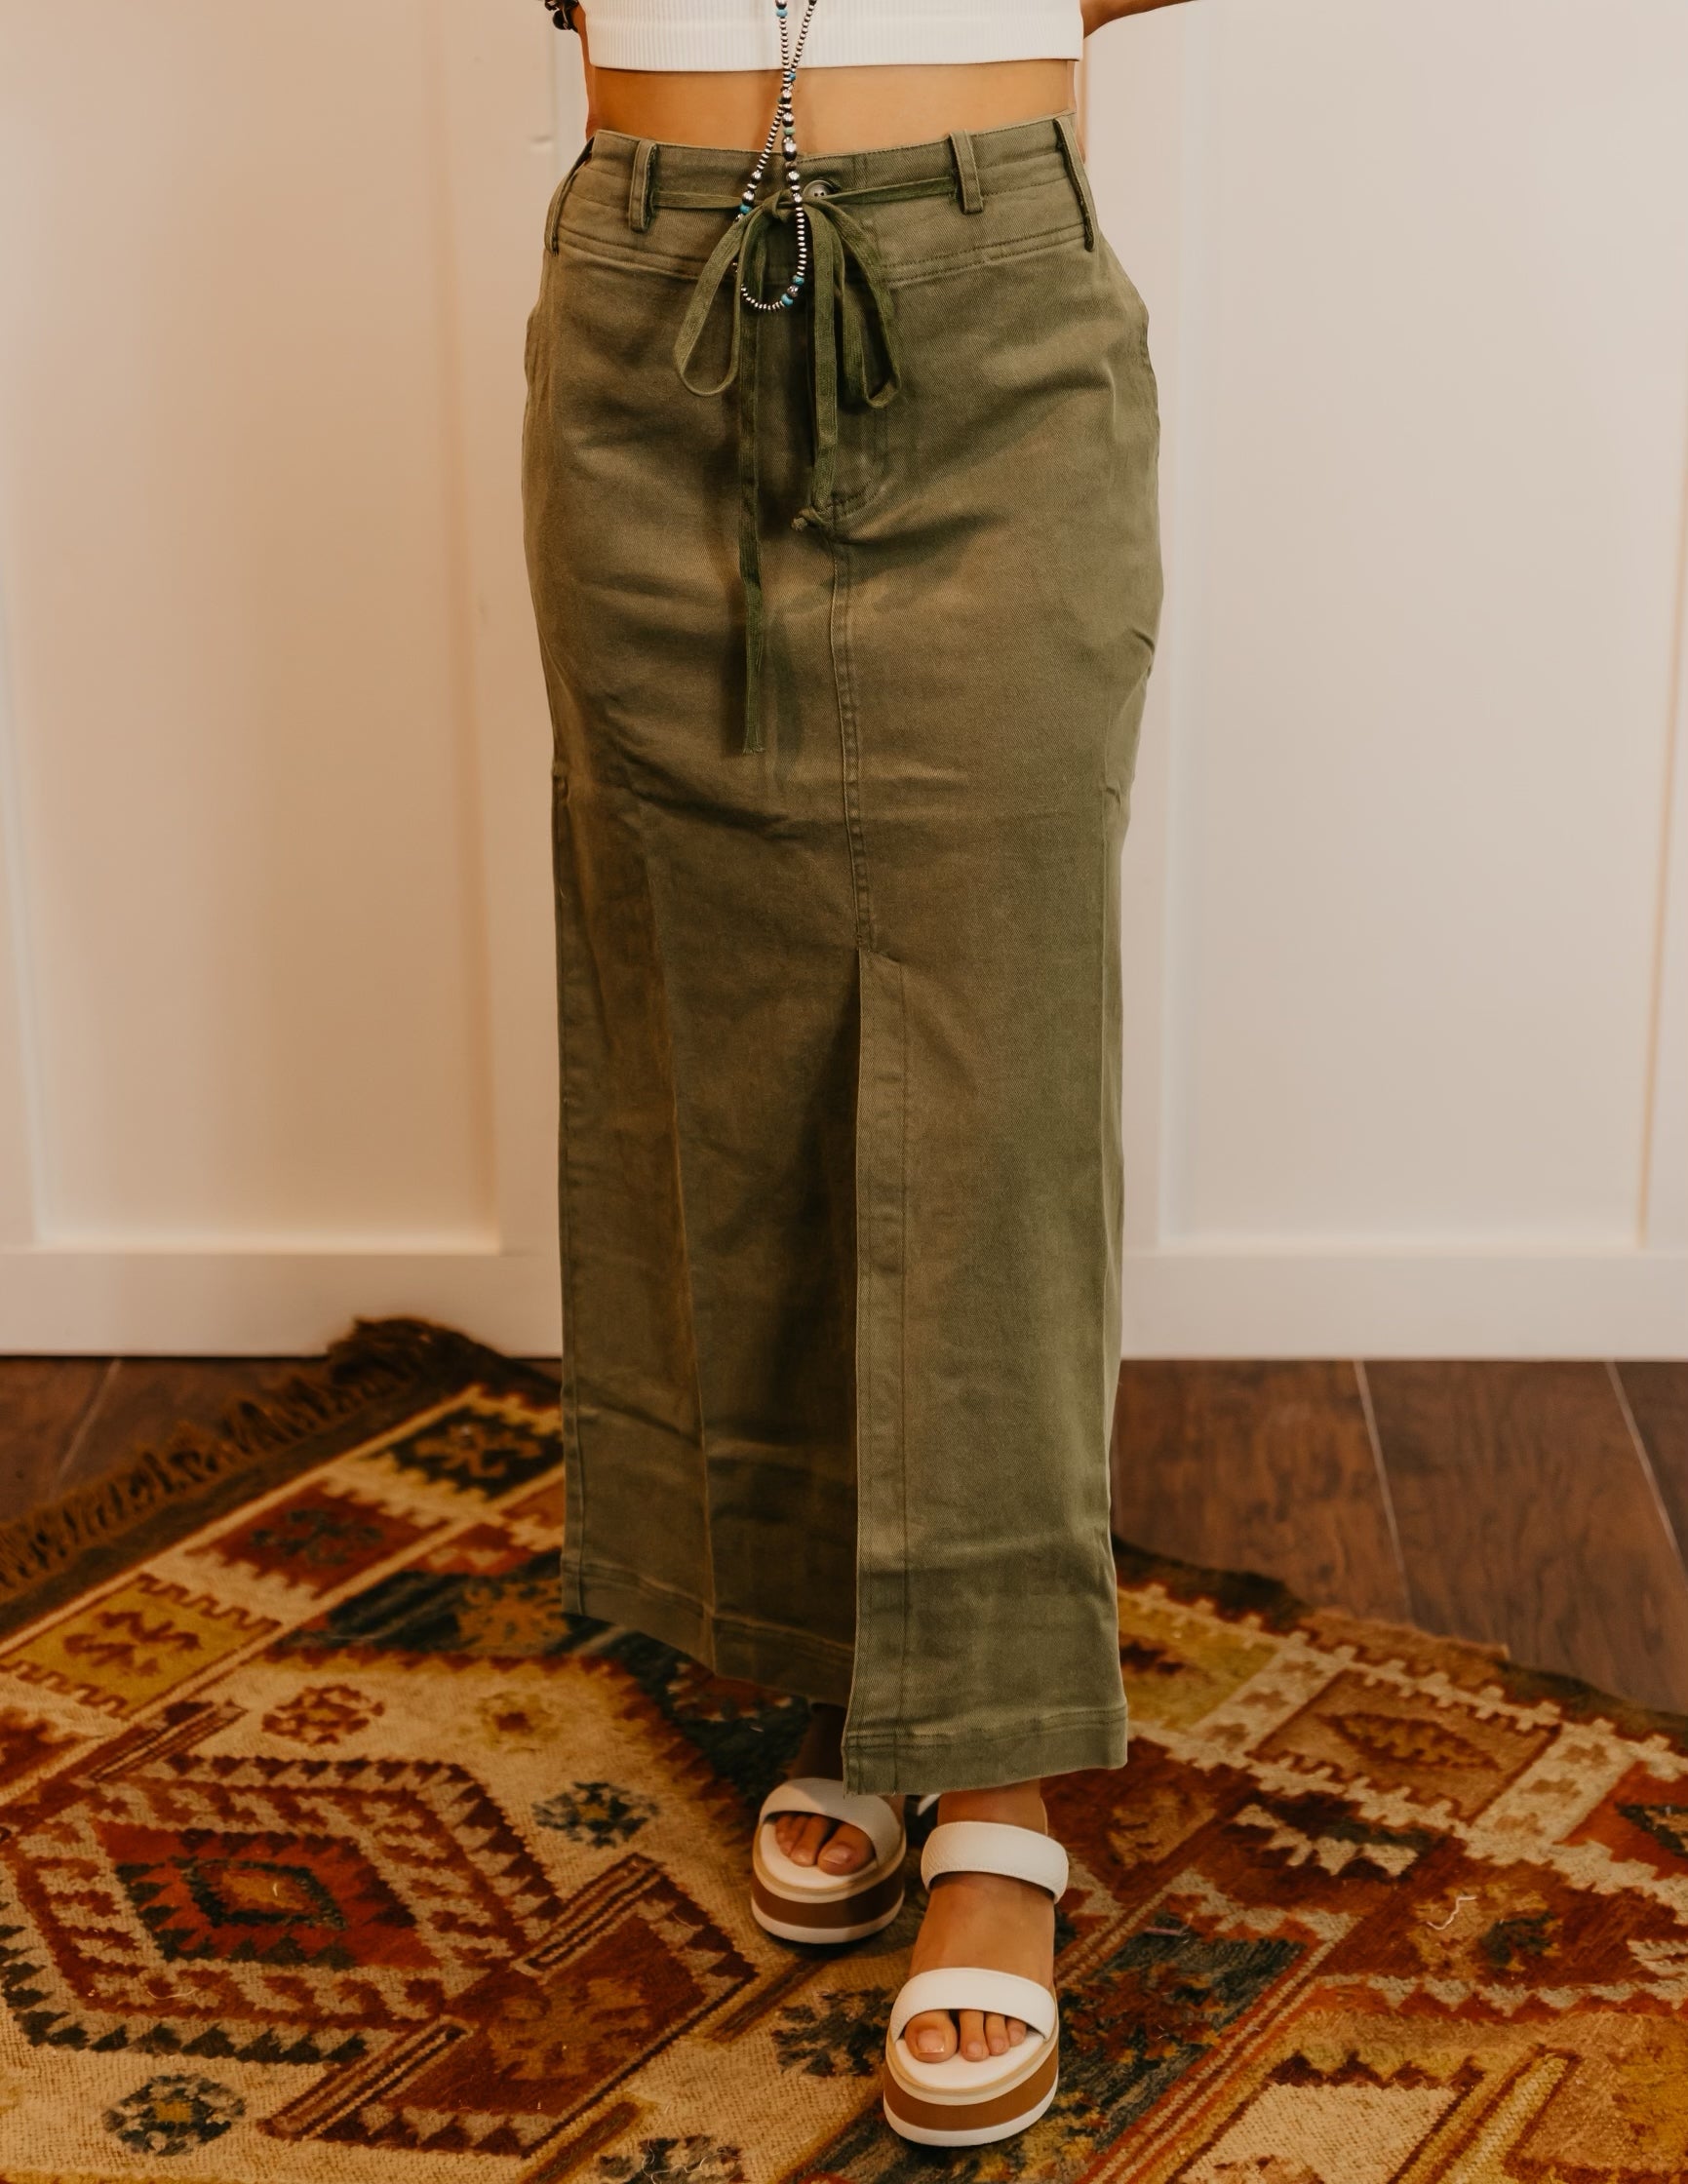 The Codie Utility Skirt